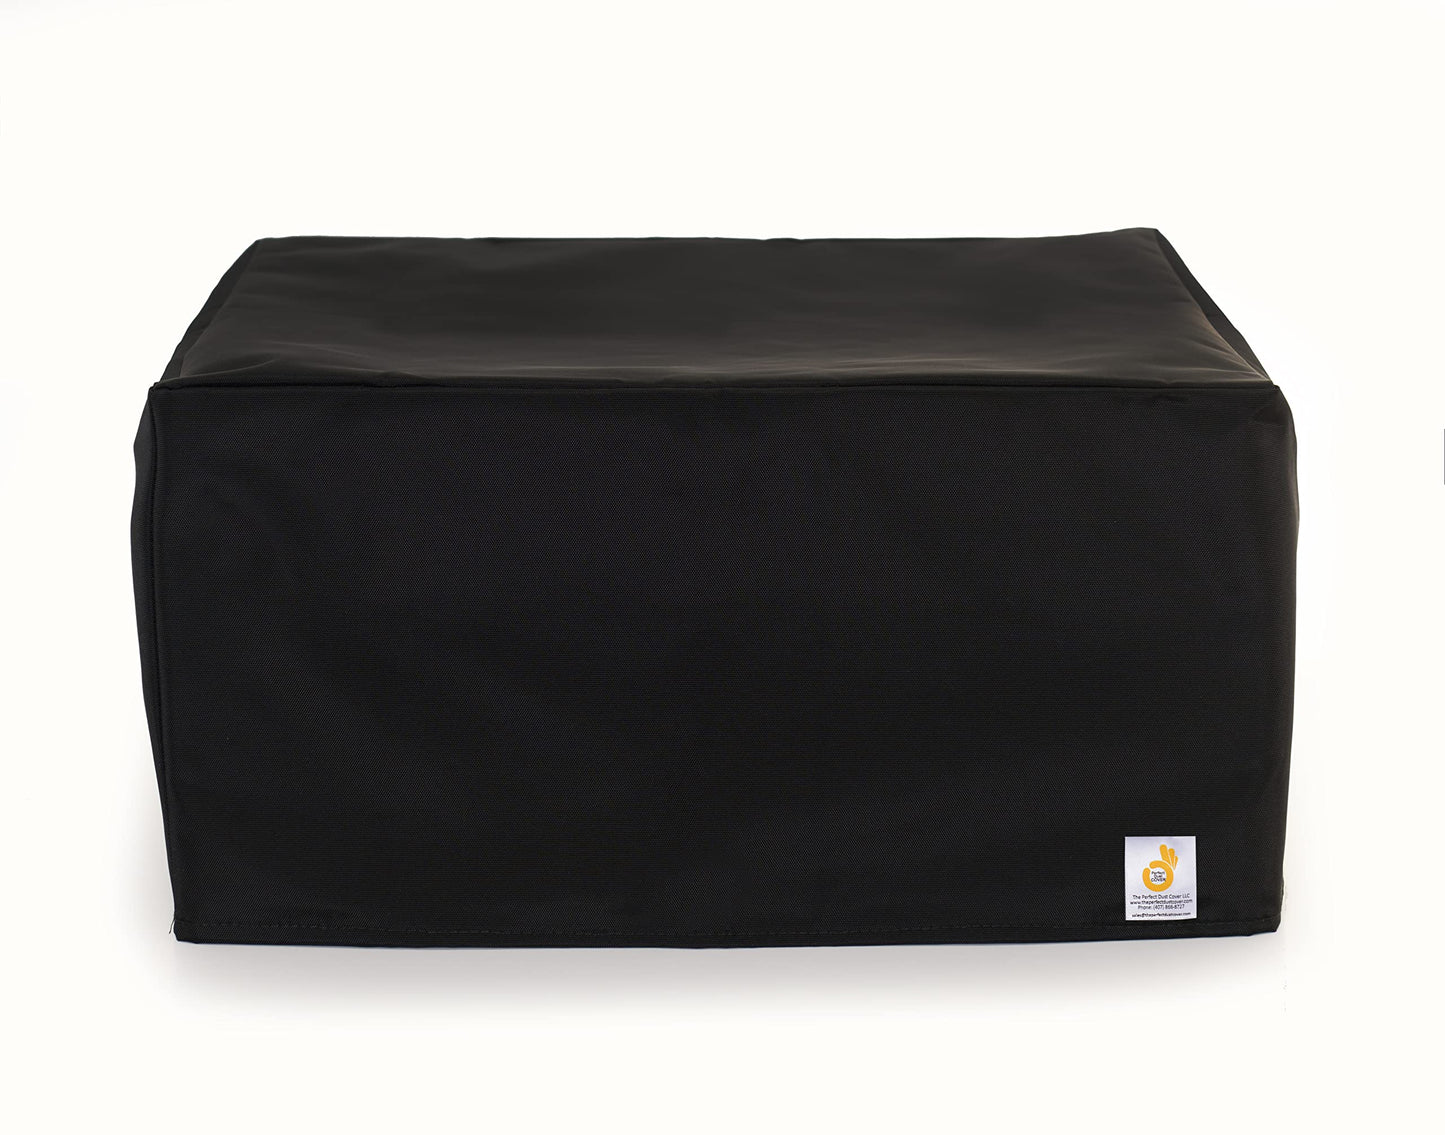 The Perfect Dust Cover, Black Nylon Cover Compatible with Epson WorkForce WF-7210 Wide-format All-in-One Printer, Double Stitched and Waterproof Dust Cover by The Perfect Dust Cover LLC